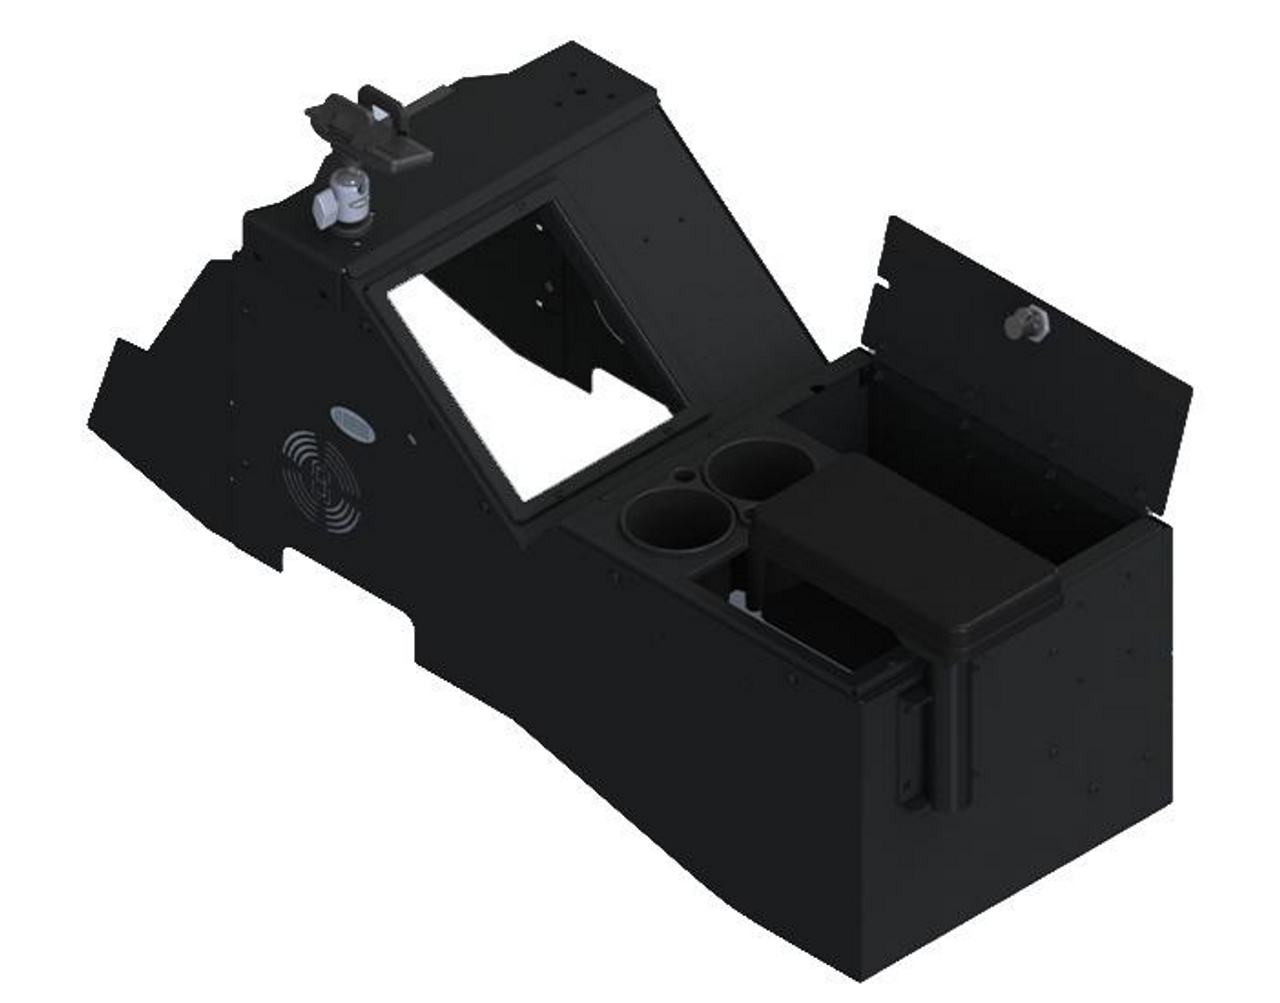 Gamber Johnson 7170-0882-01, 2021 Ford F-150 Wide Body Console Box Kit with Magnetic Phone Holder and Cup Holder and Rear Armrest, includes faceplates and filler panels